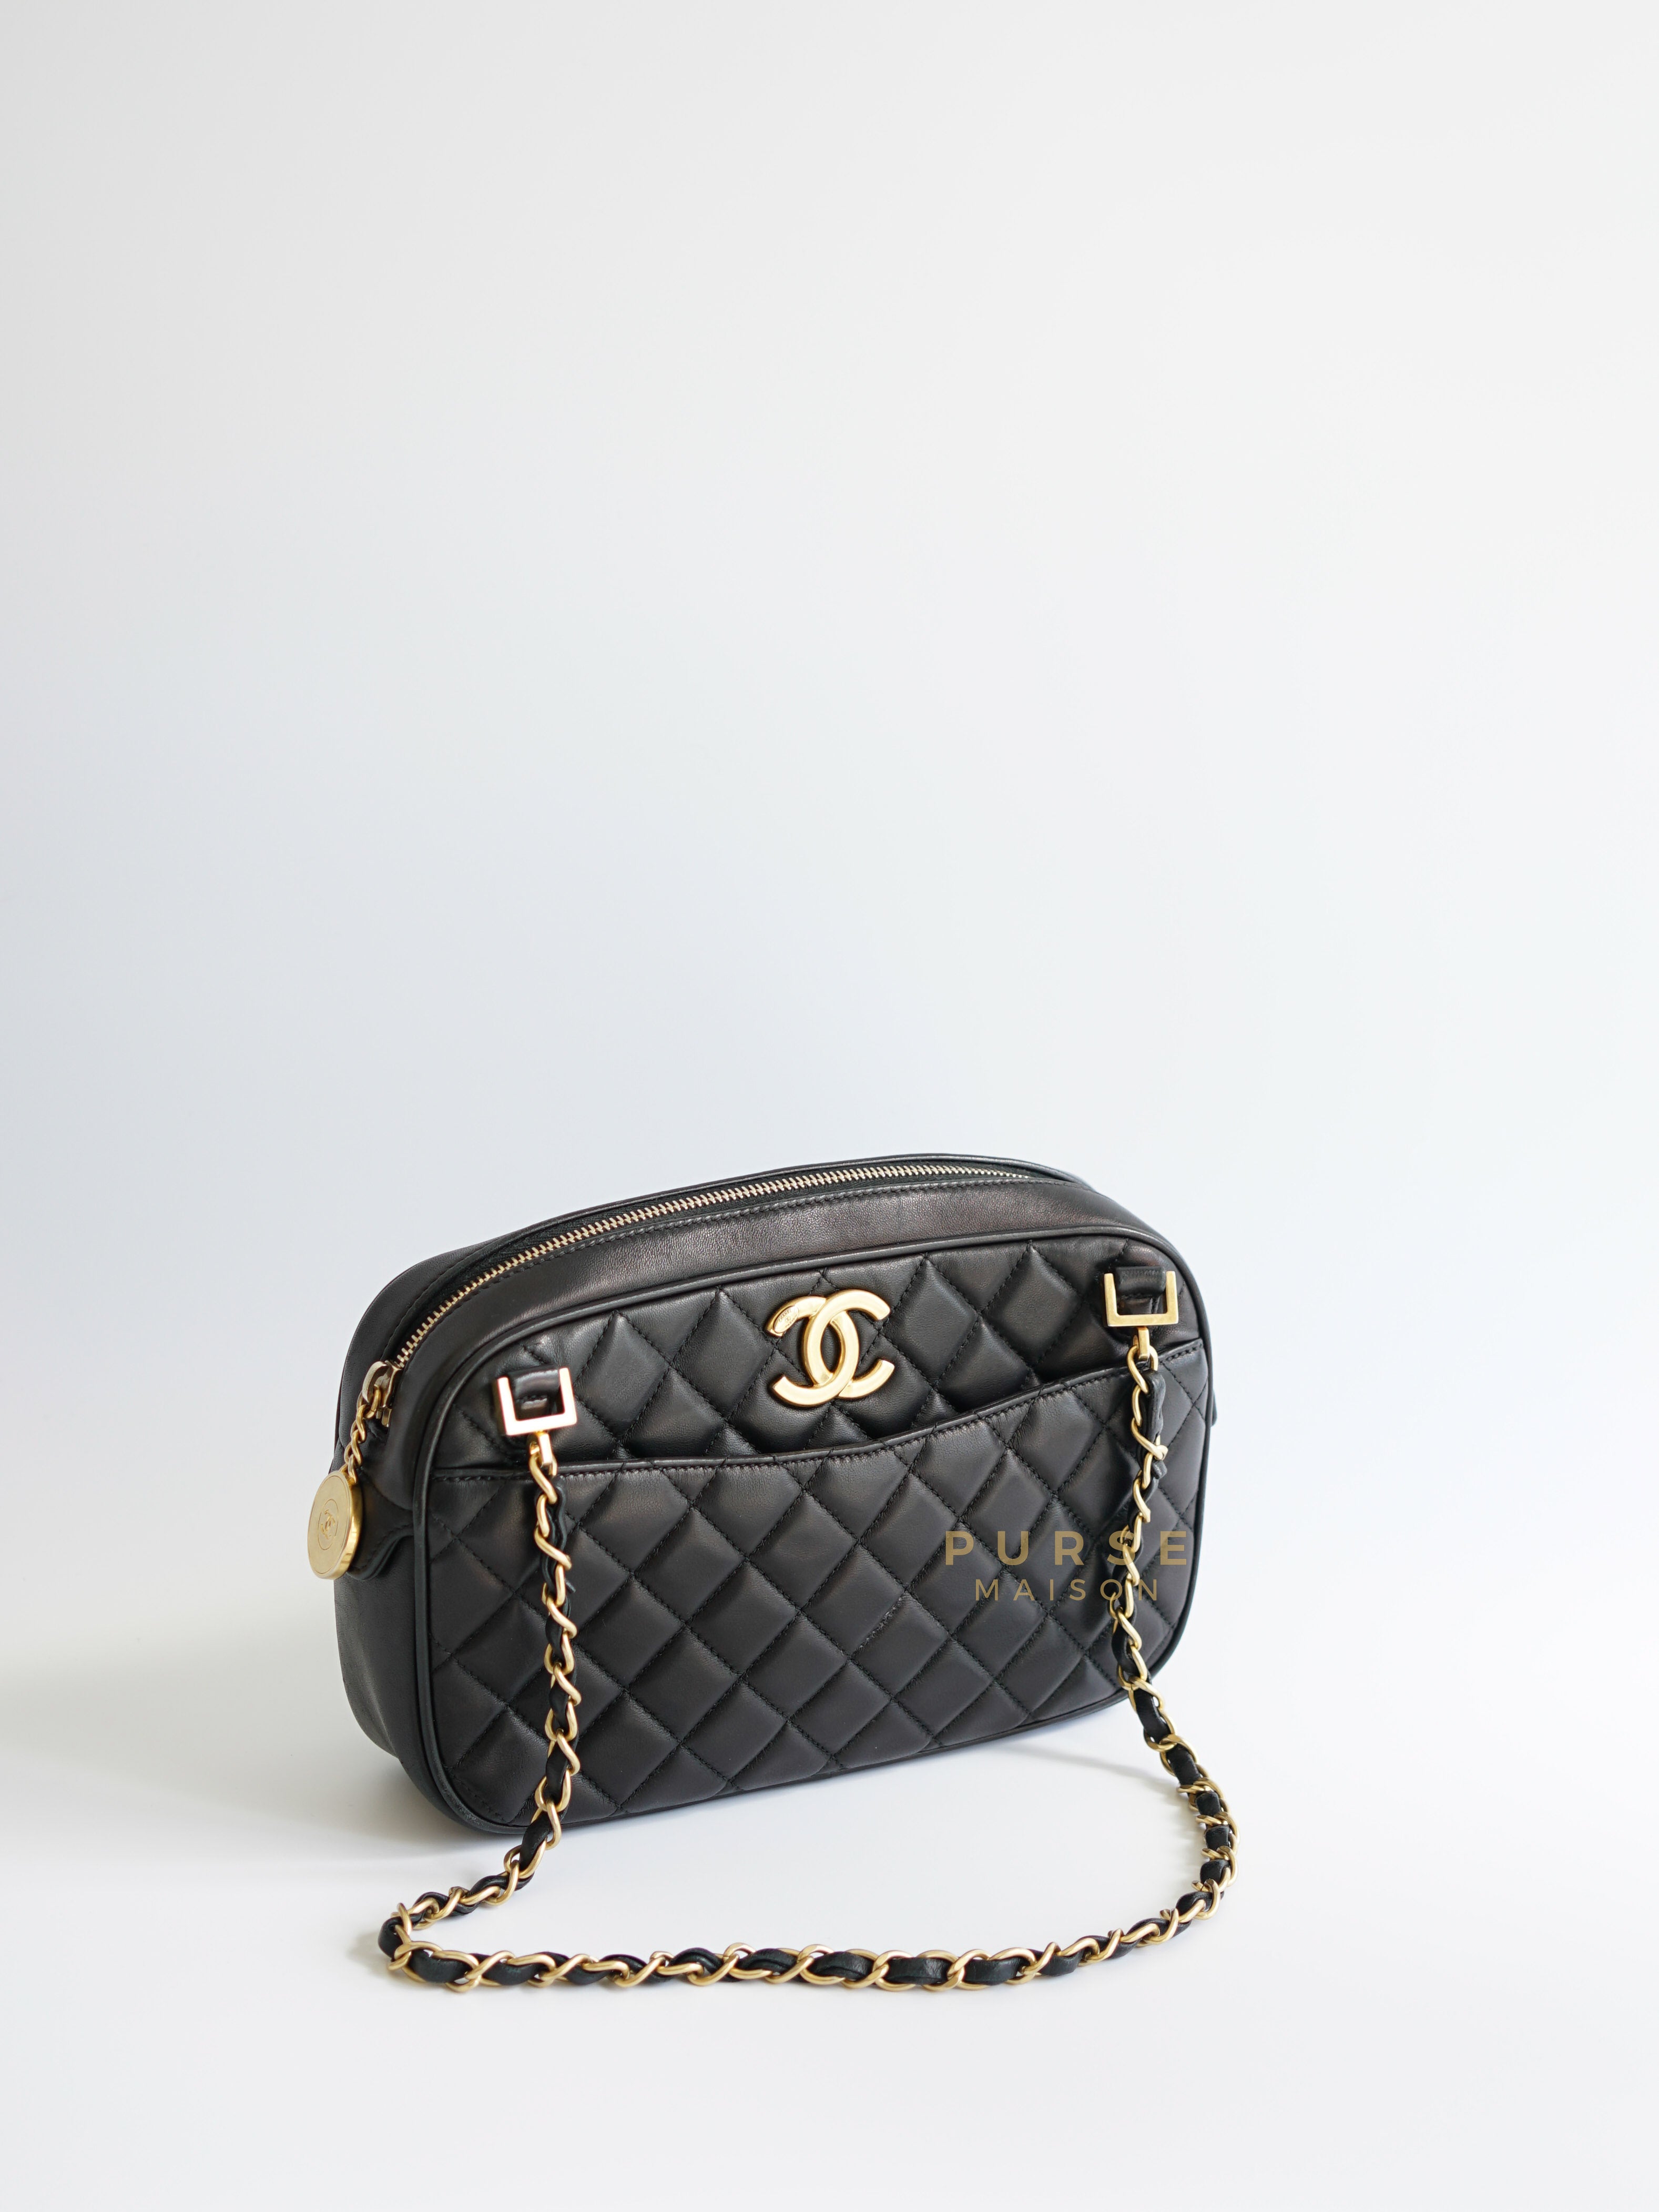 Camera Bag in Black Quilted Lambskin & Aged Gold Hardware Series 17 | Purse Maison Luxury Bags Shop